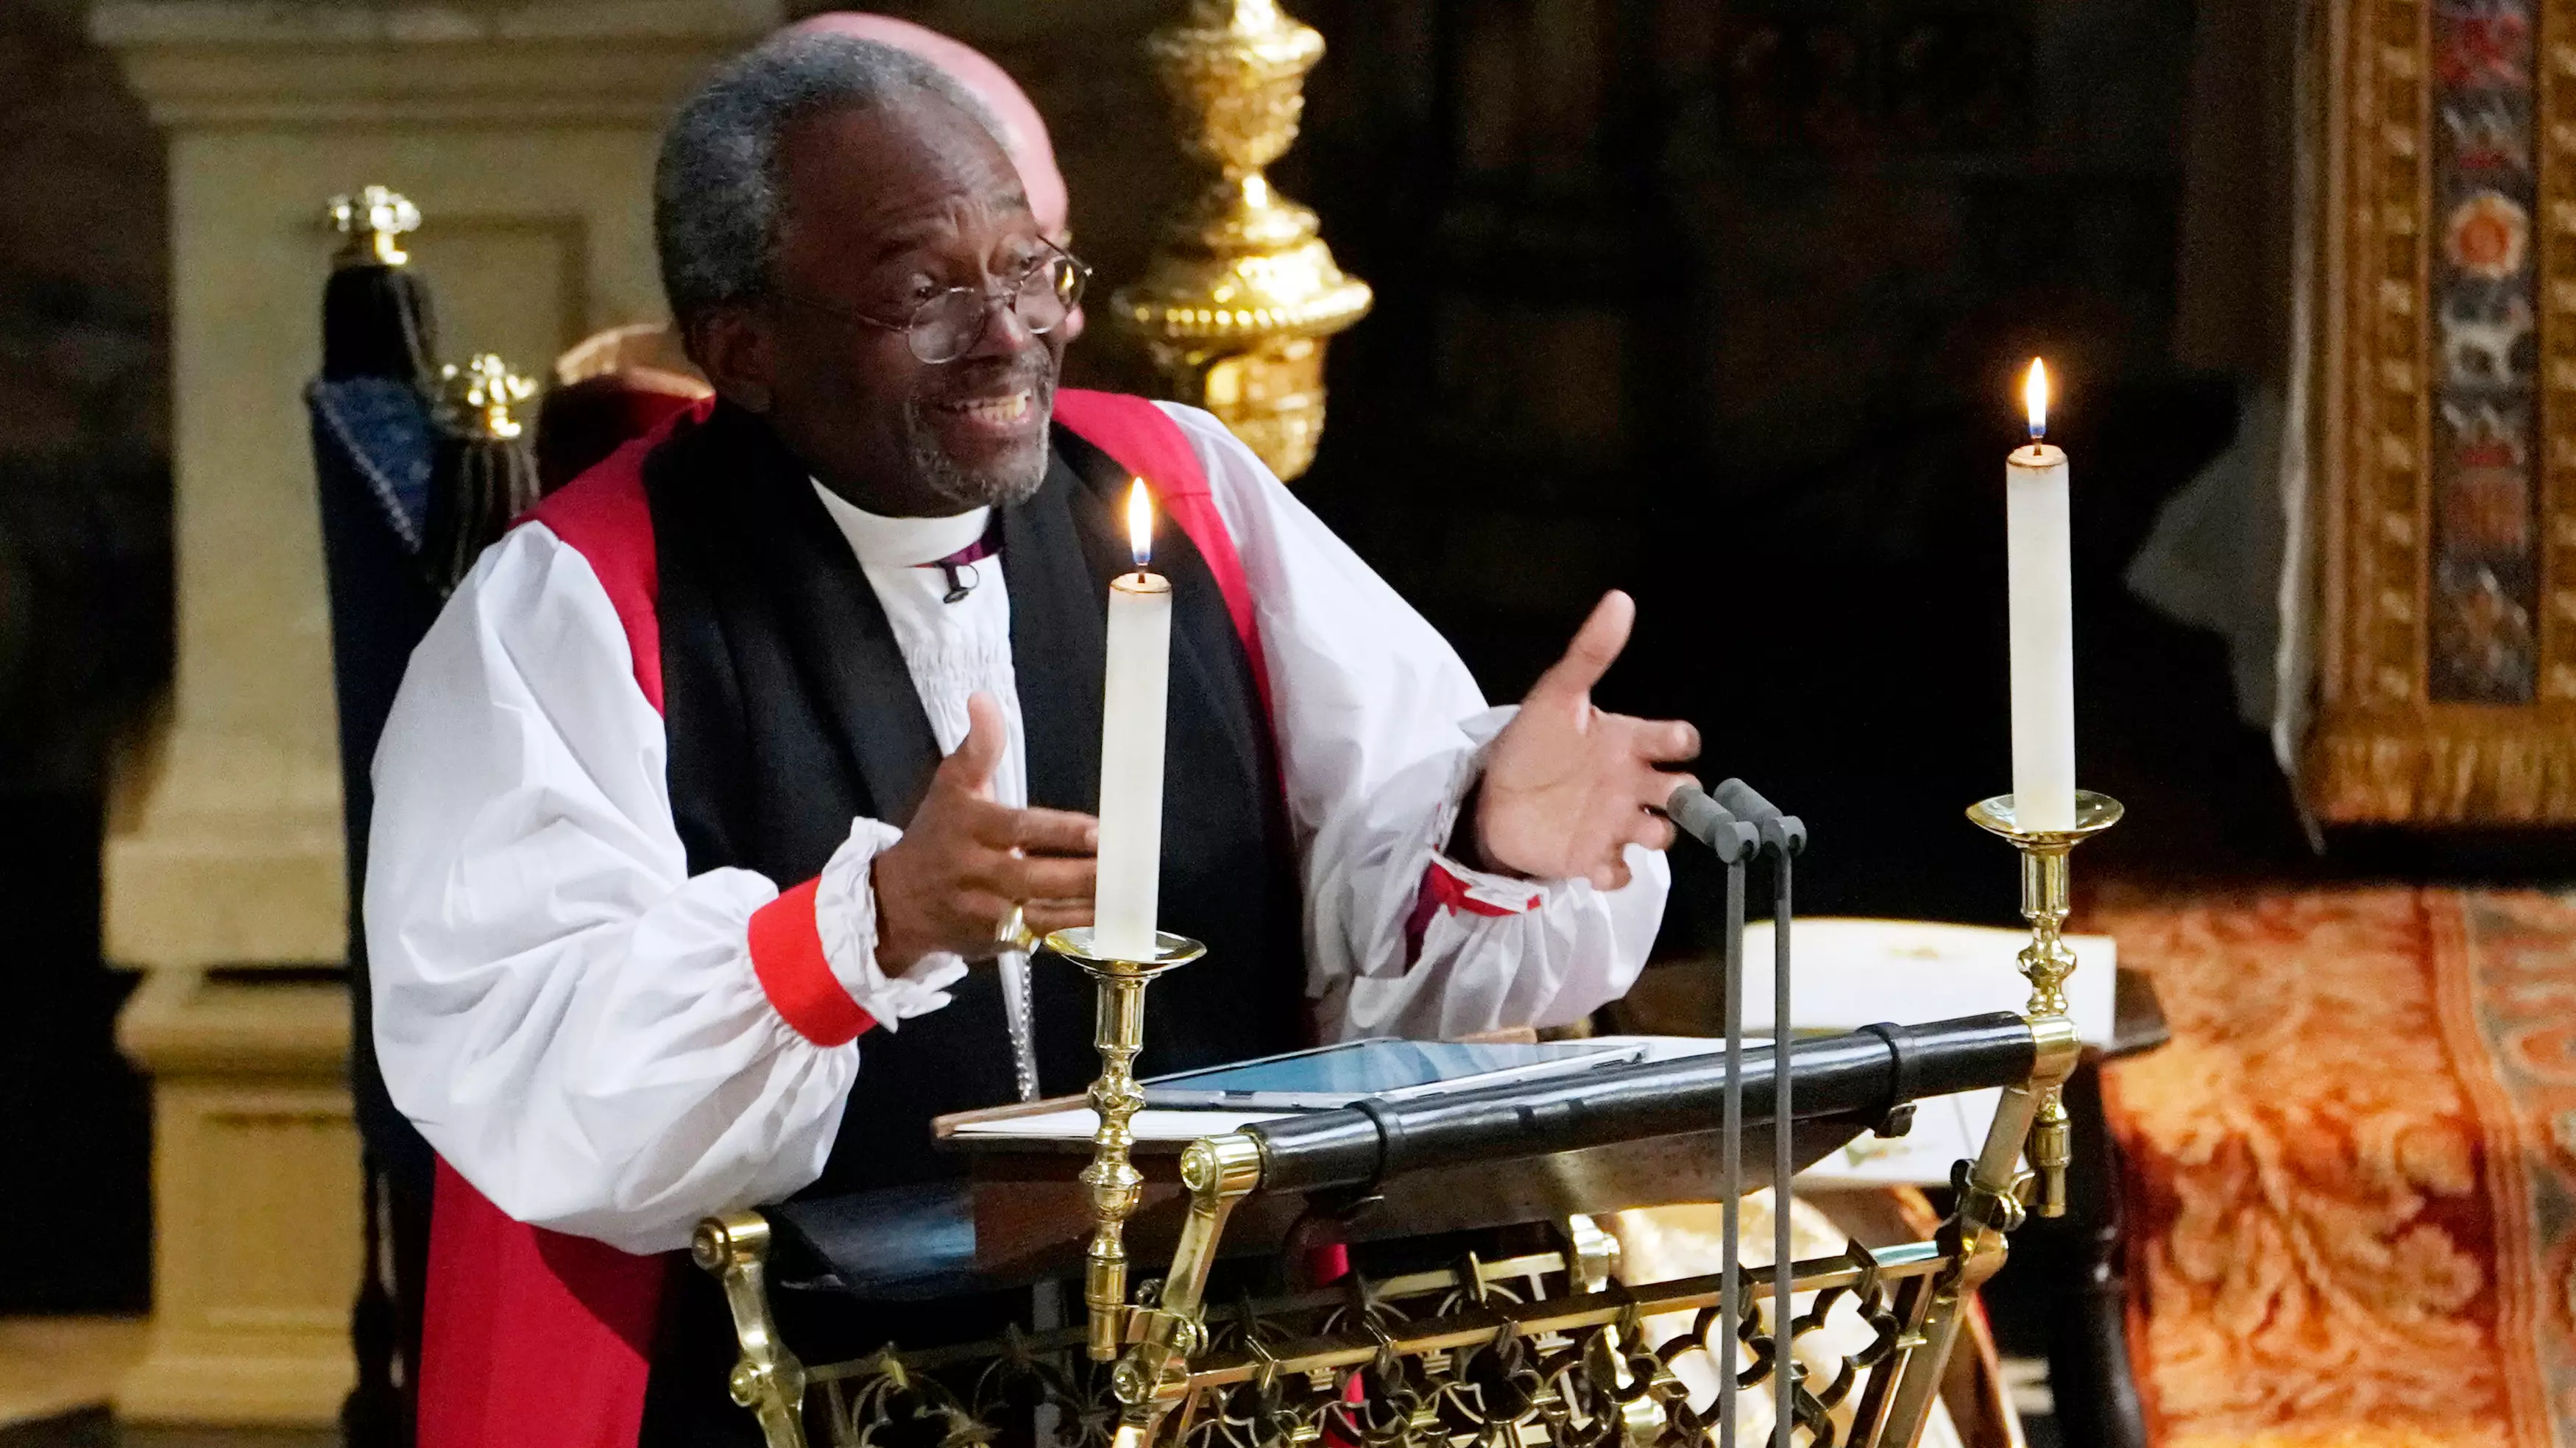 Royal Wedding 2018: Bishop Michael Curry Stole The Show For His Next Level Speech